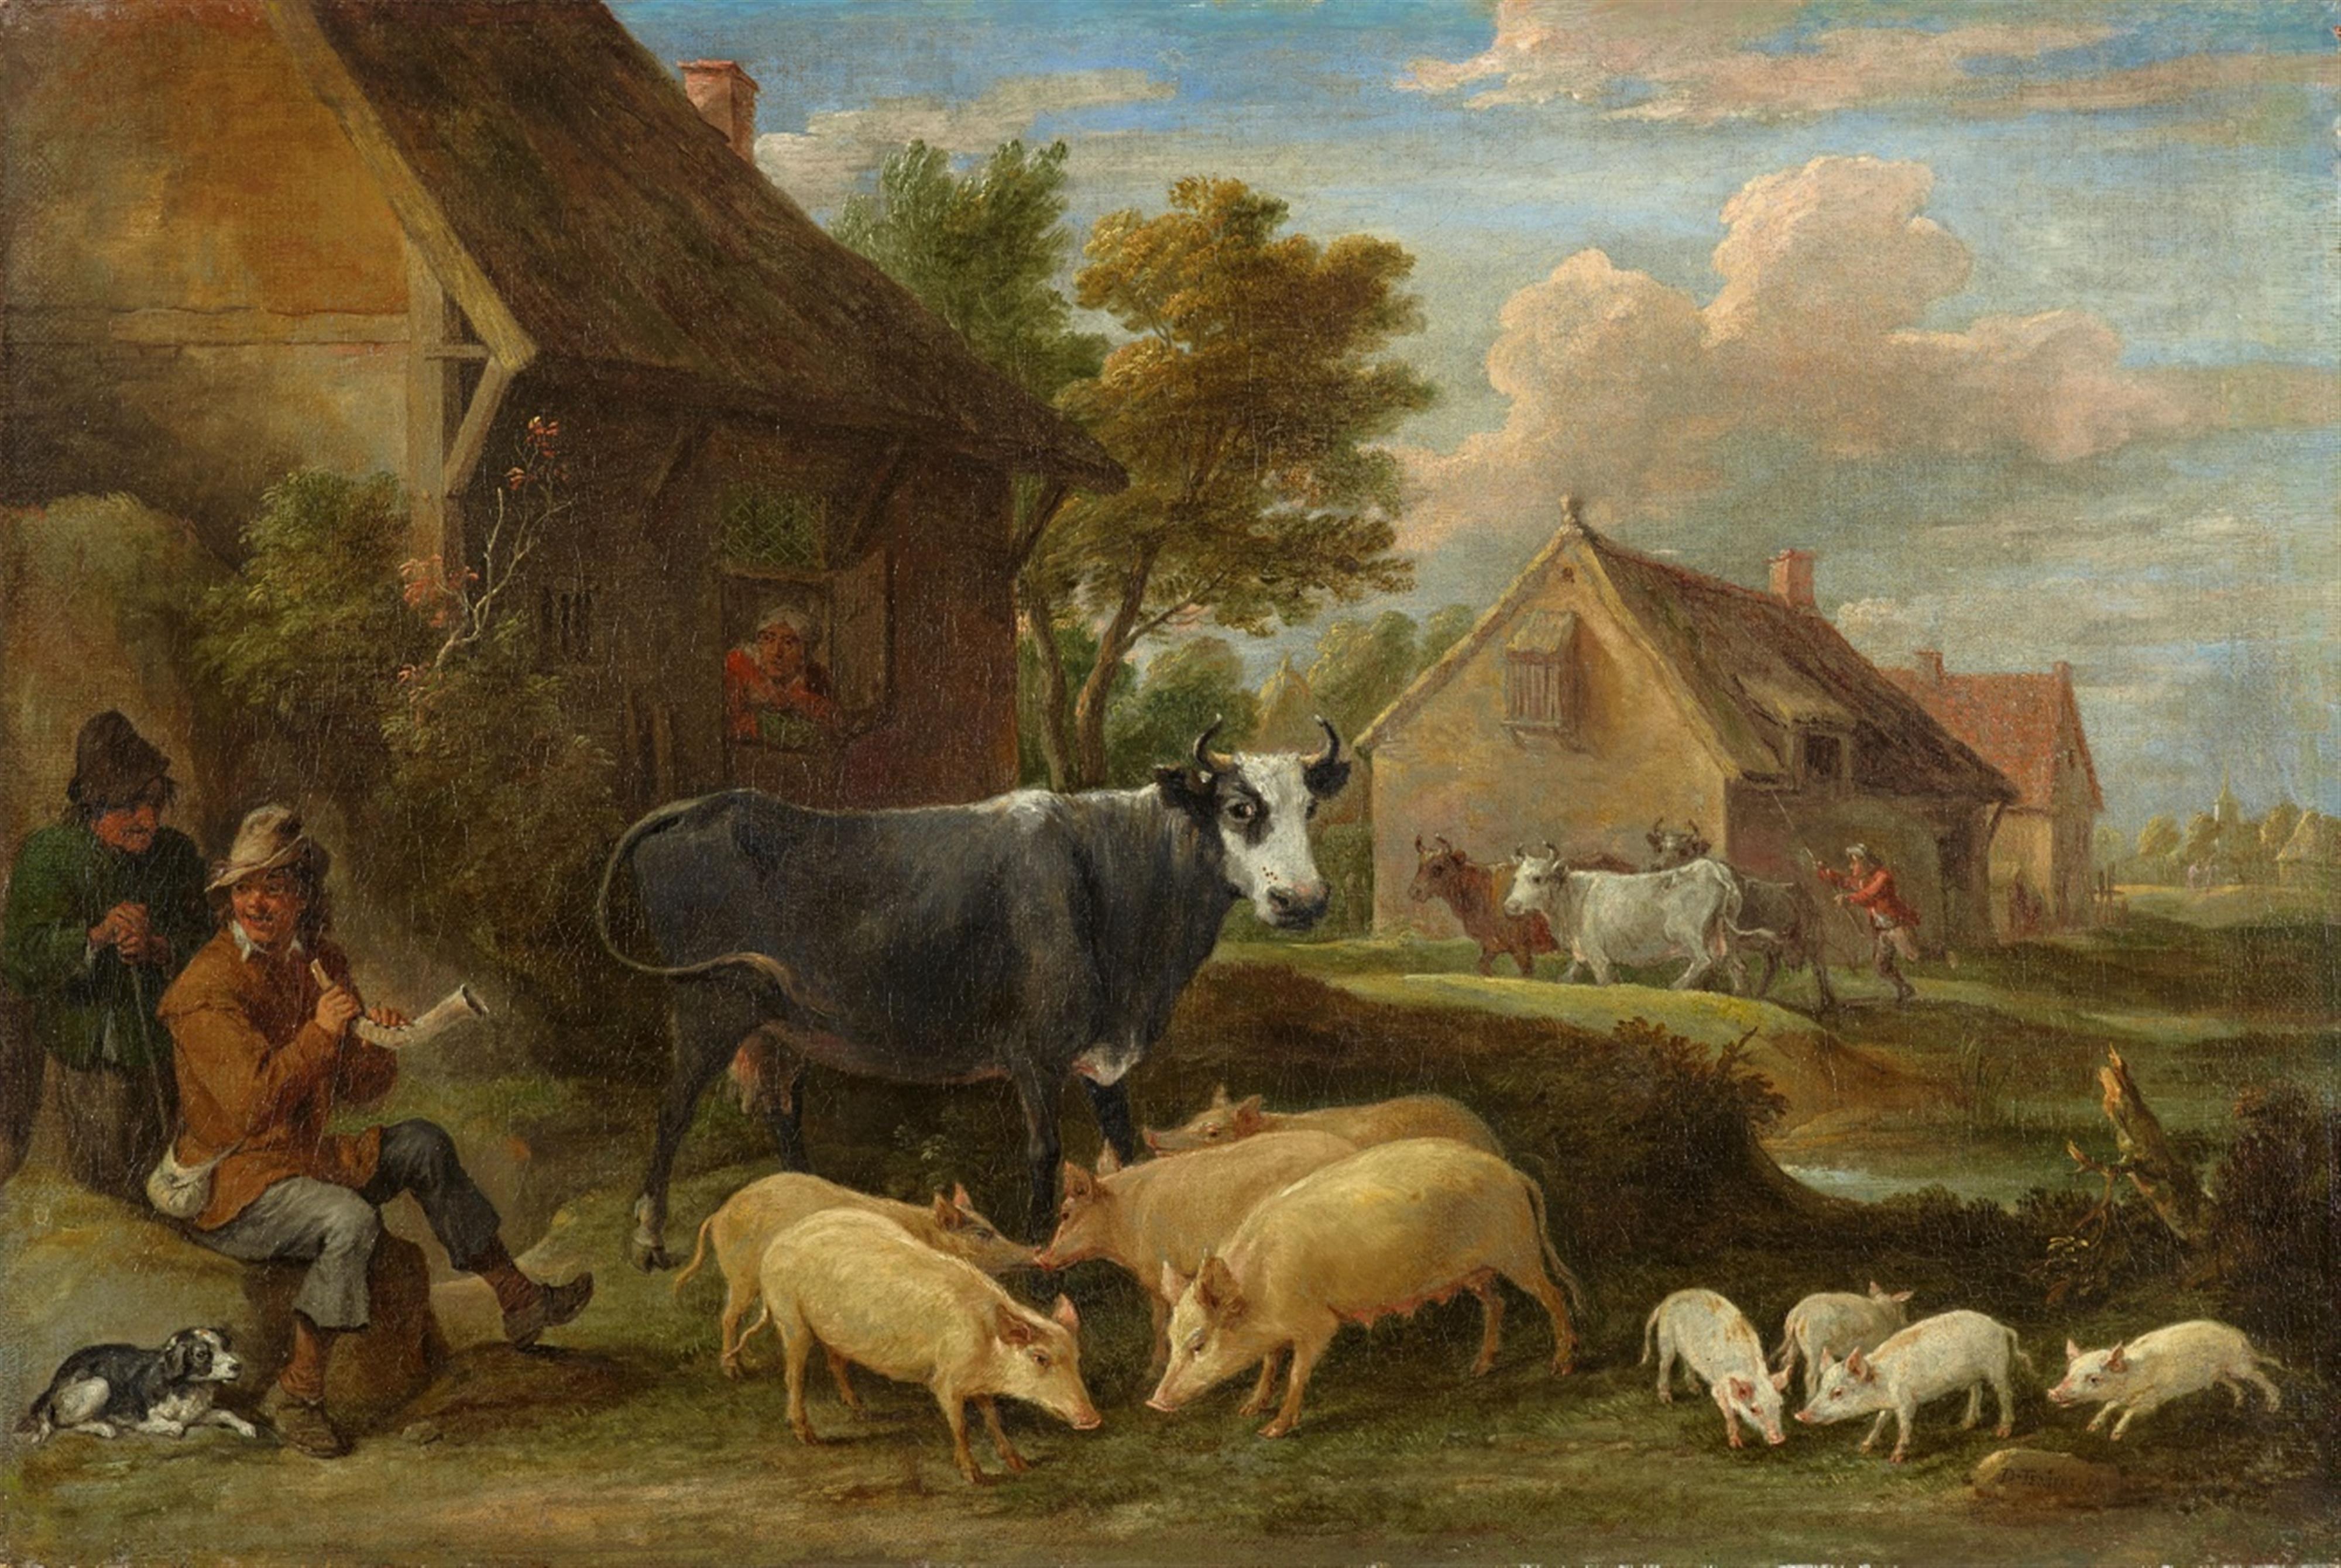 David Teniers the Younger - Village Landscape with Shepherds and Animals - image-1